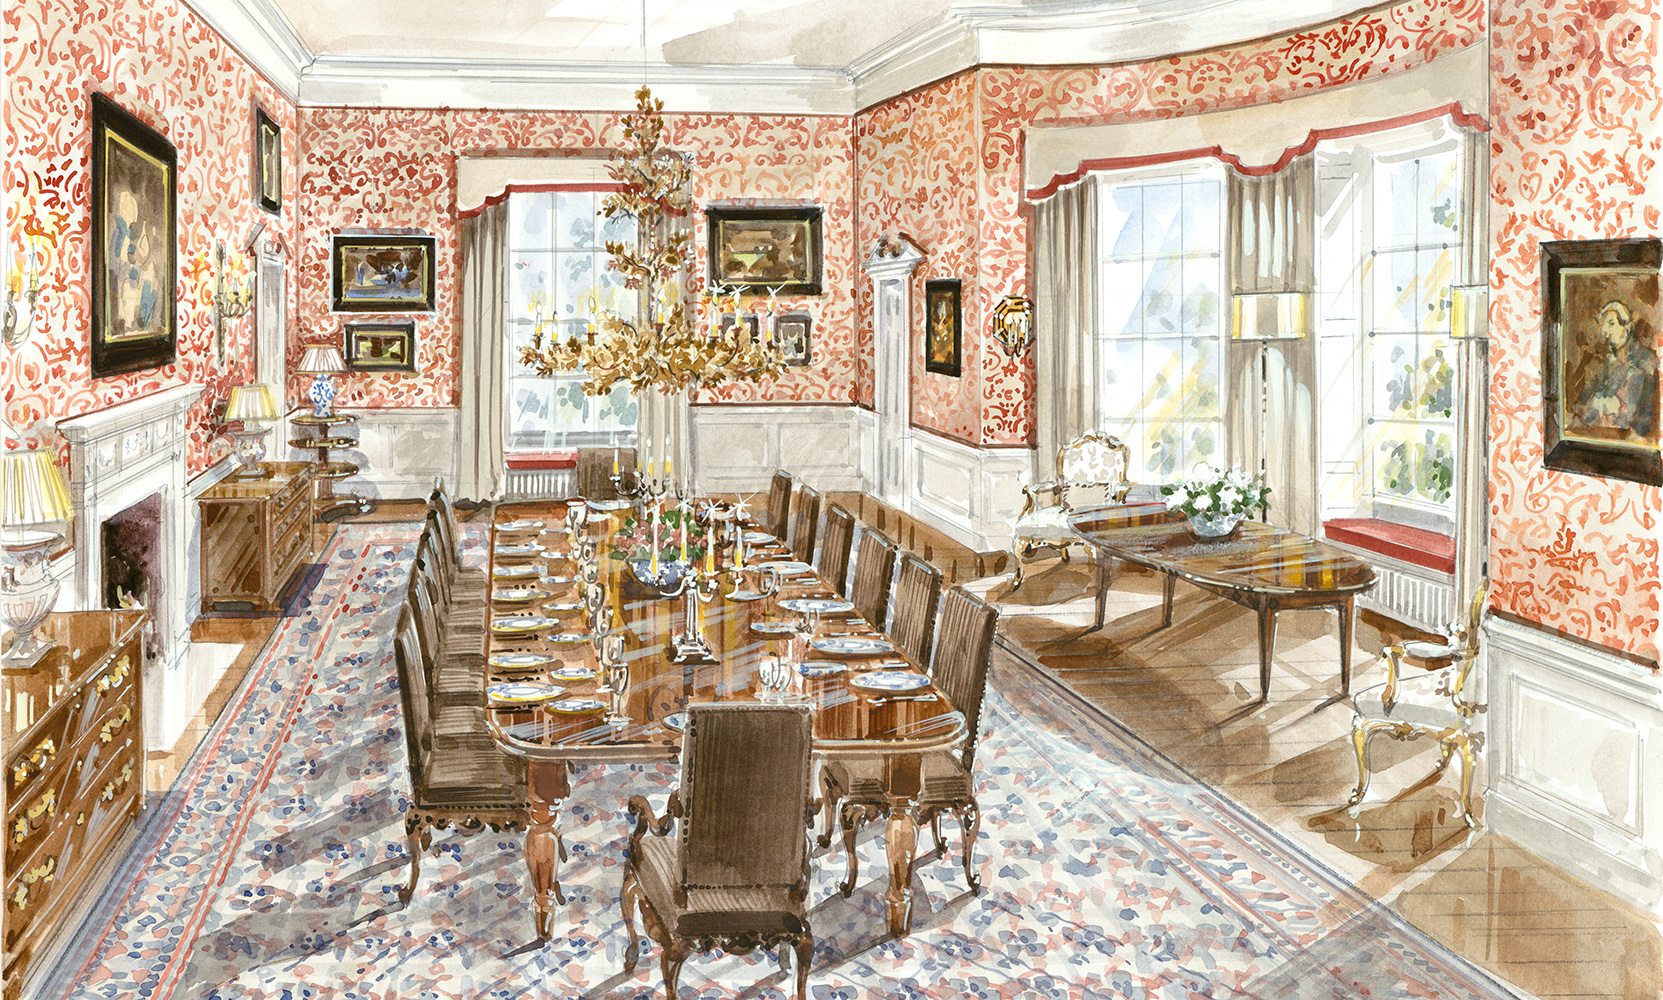 Watercolor of a dining room in Scotland designed by Todhunter Earle